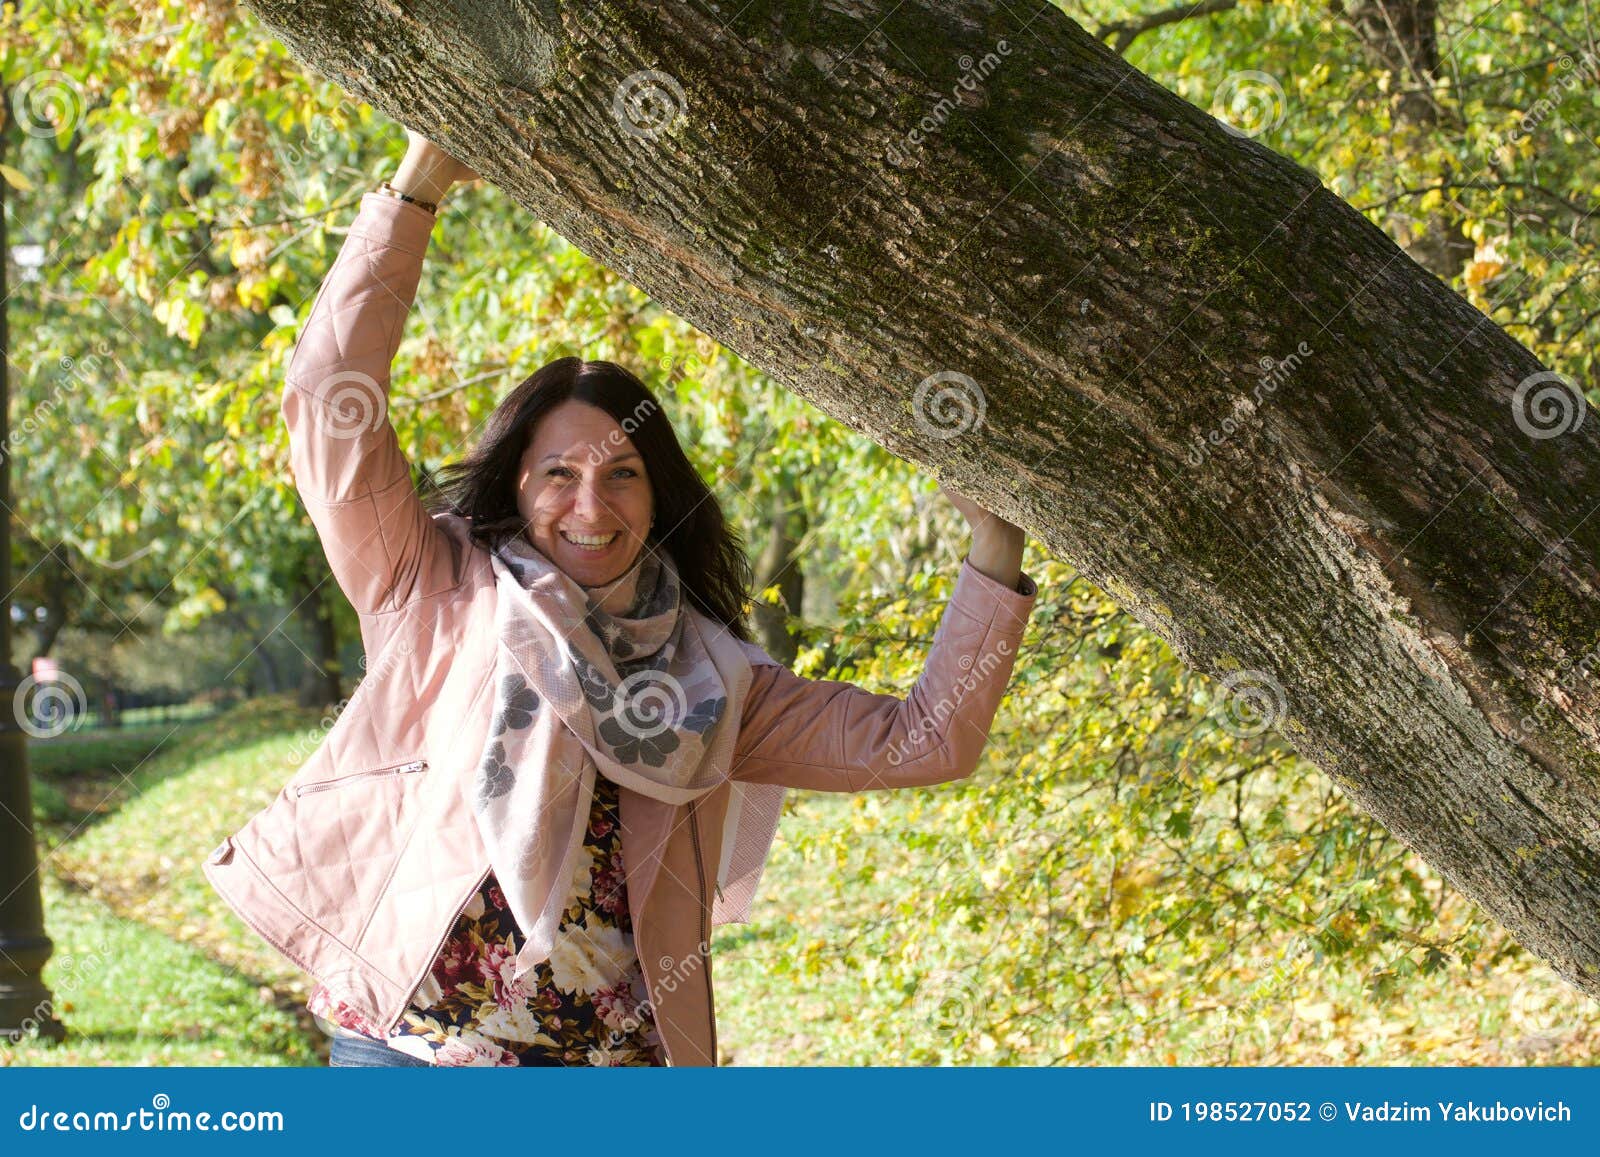 Girl Near a Leaning Tree in an Autumn Park. she Put Her Hands on the ...